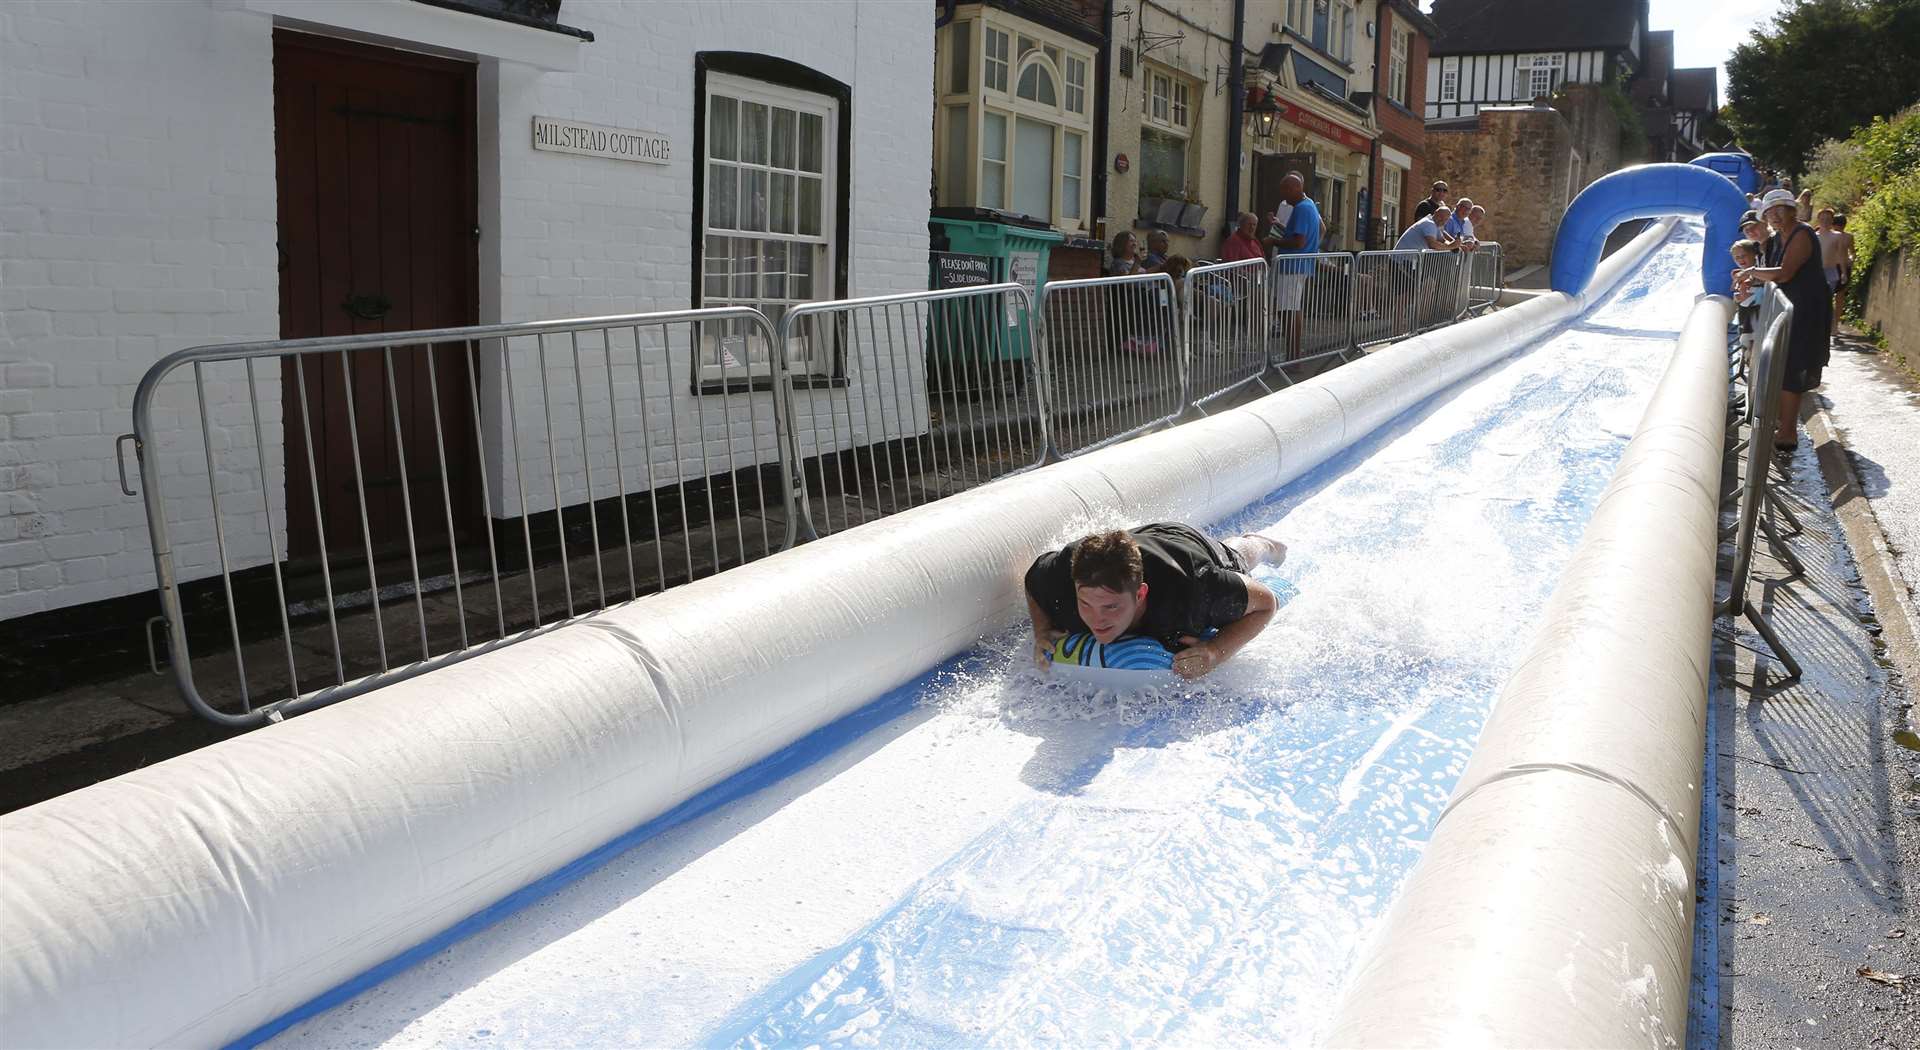 The Sutton Valence slide, organised by the Queens Head Oddfellows Fund Picture: Andy Jones